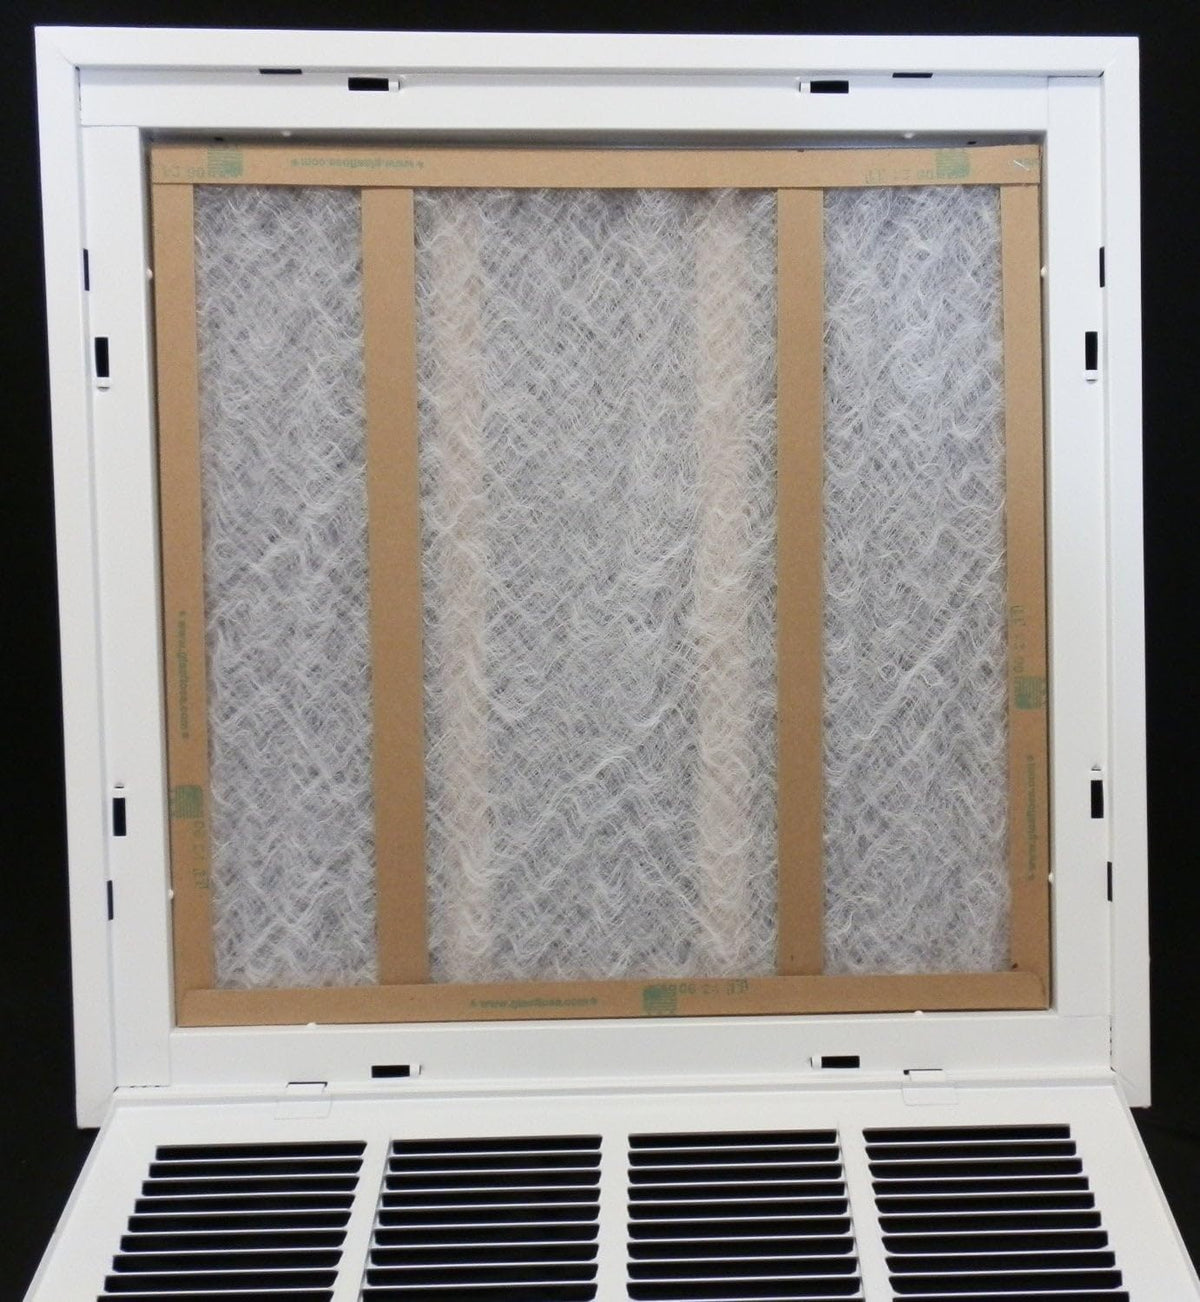 24&quot; X 14&quot; Steel Return Air Filter Grille for 1&quot; Filter - Removable Frame - * Filter Included * [Outer Dimensions: 26 5/8&quot; X 16 5/8&quot;]